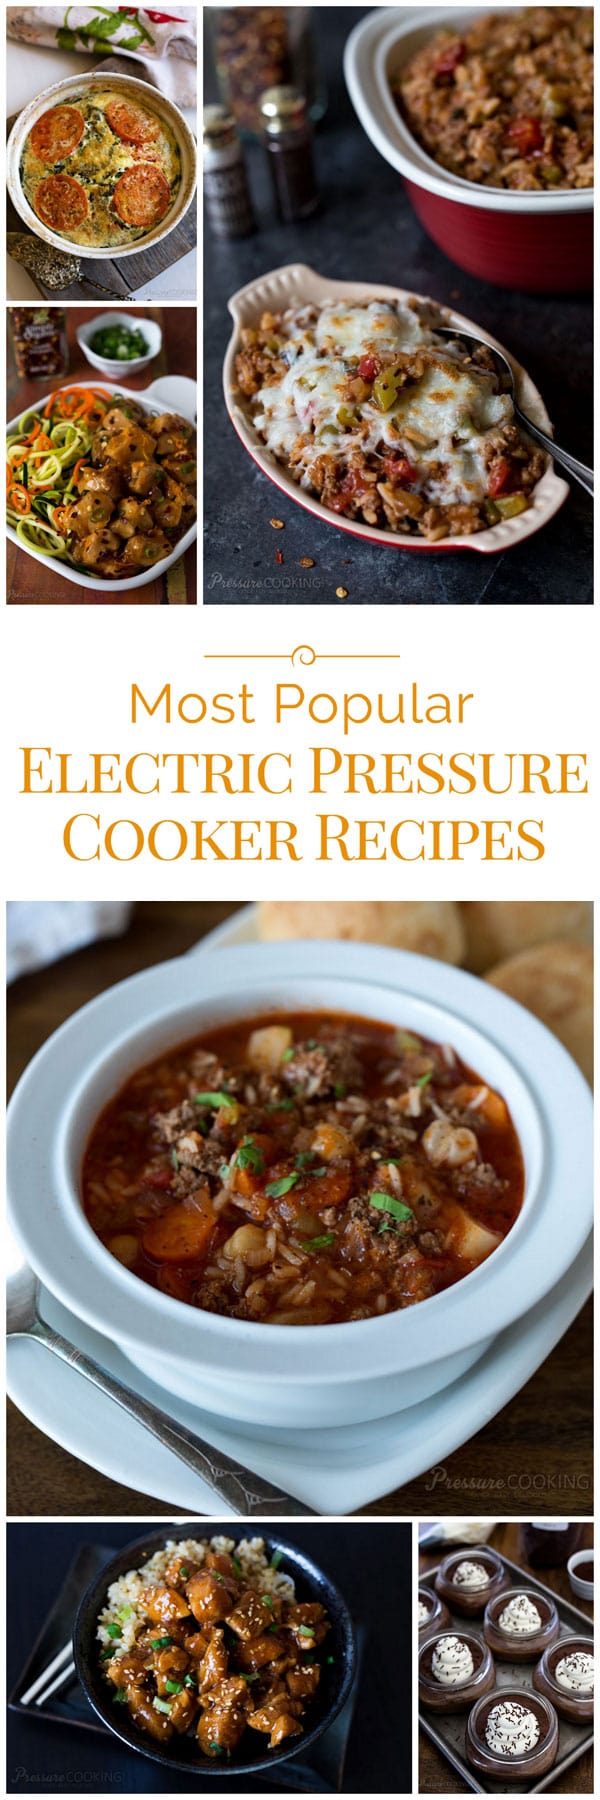 The Most Popular Electric Pressure Cooker Recipes for your Instant Pot or Pressure Cooker